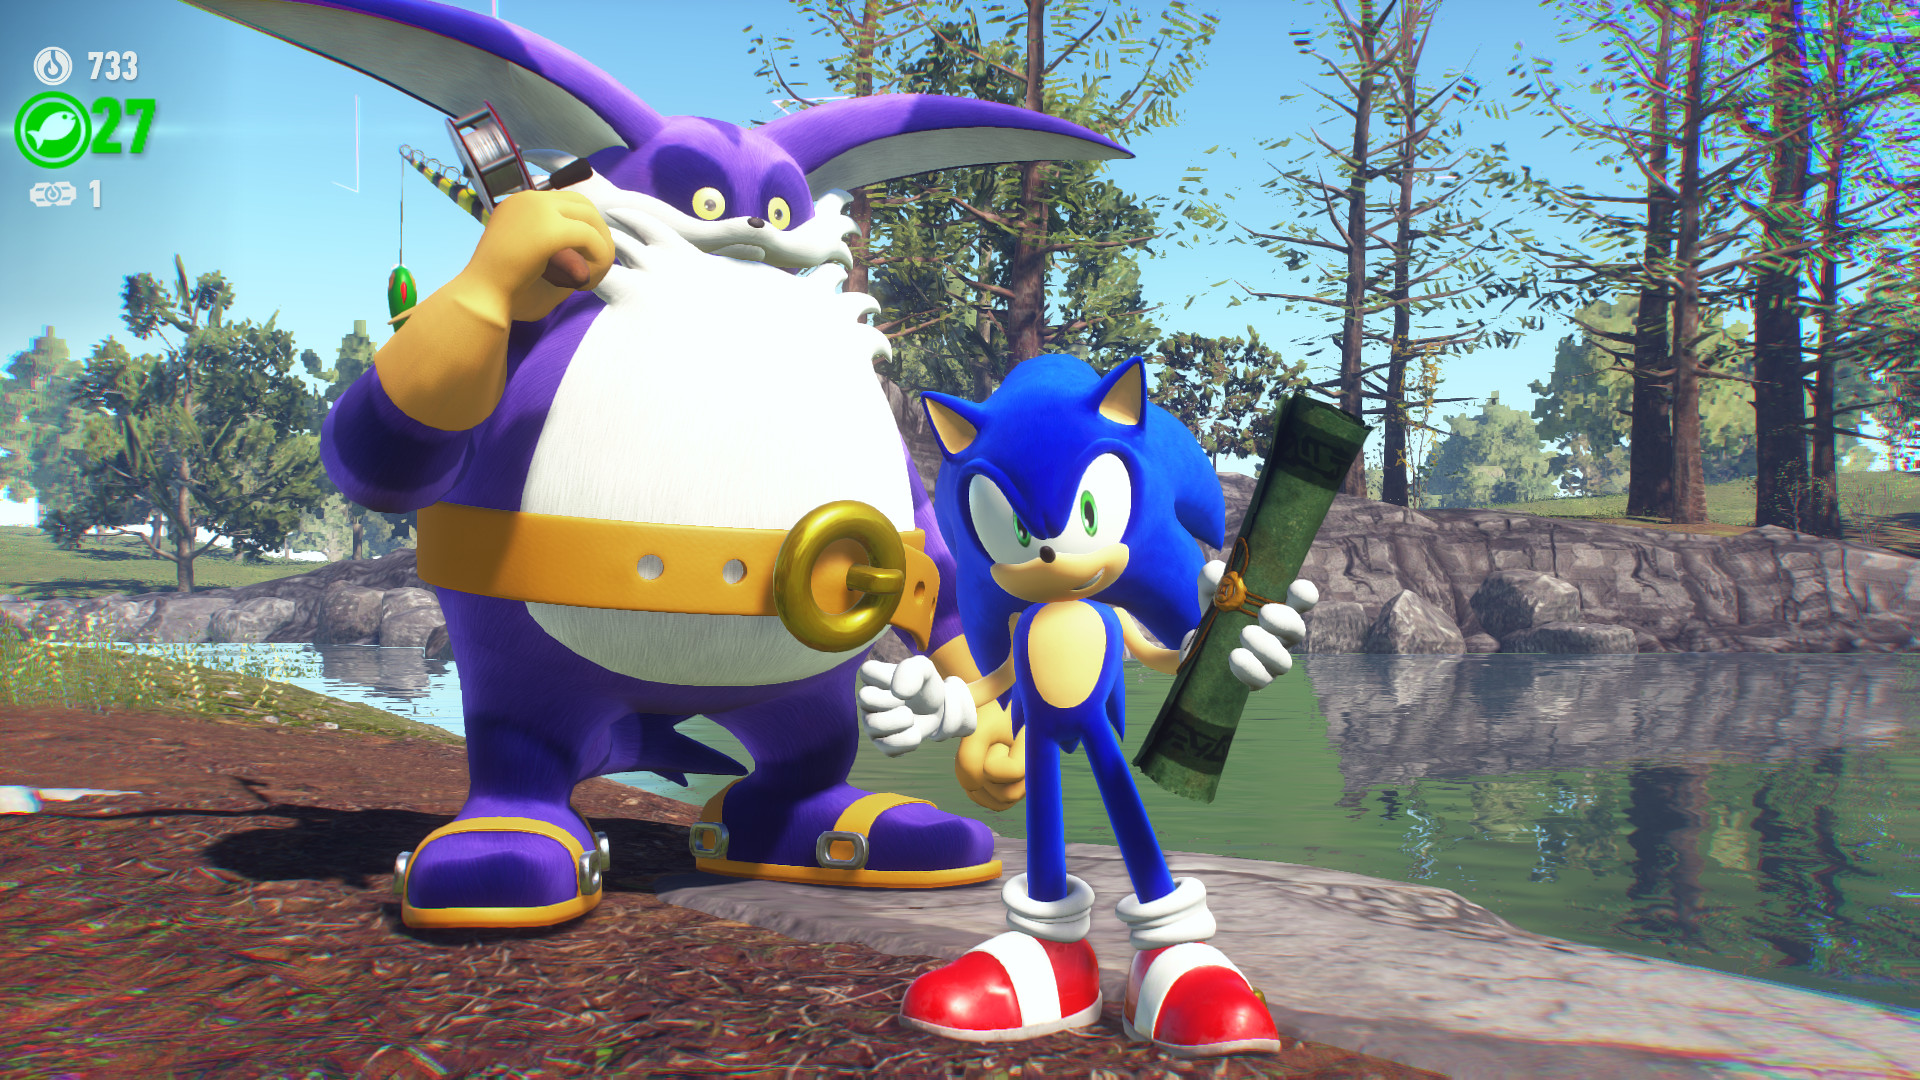 My Sonic Frontiers is strange! I do not use mods but look at my